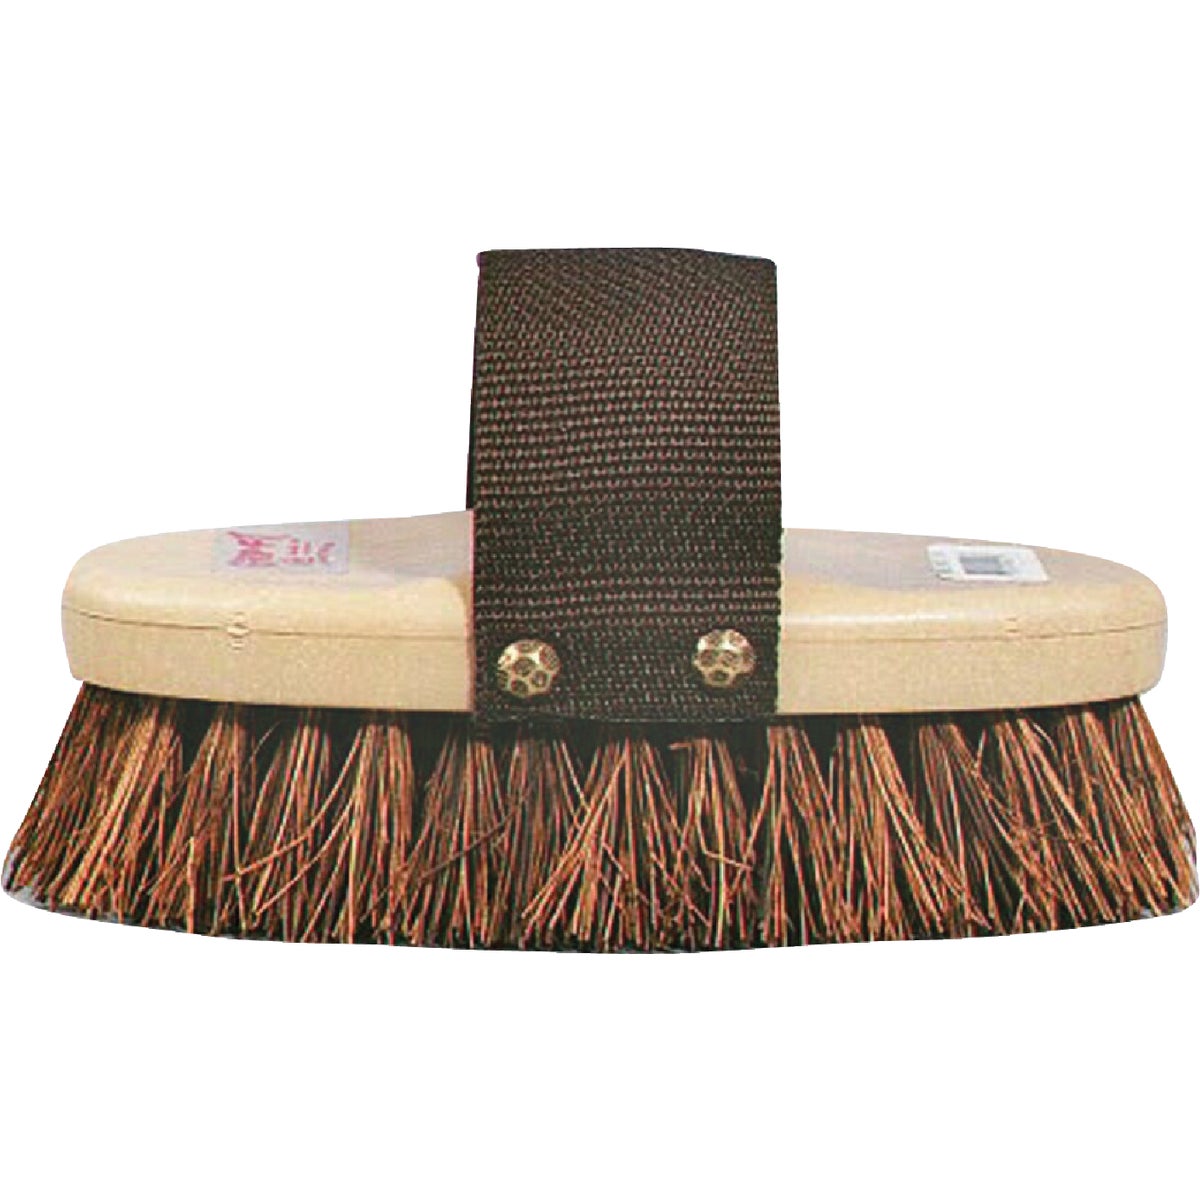 Item 715514, Cowboy style horse grooming brush. 7-1/2 In. x 3-3/4 In.